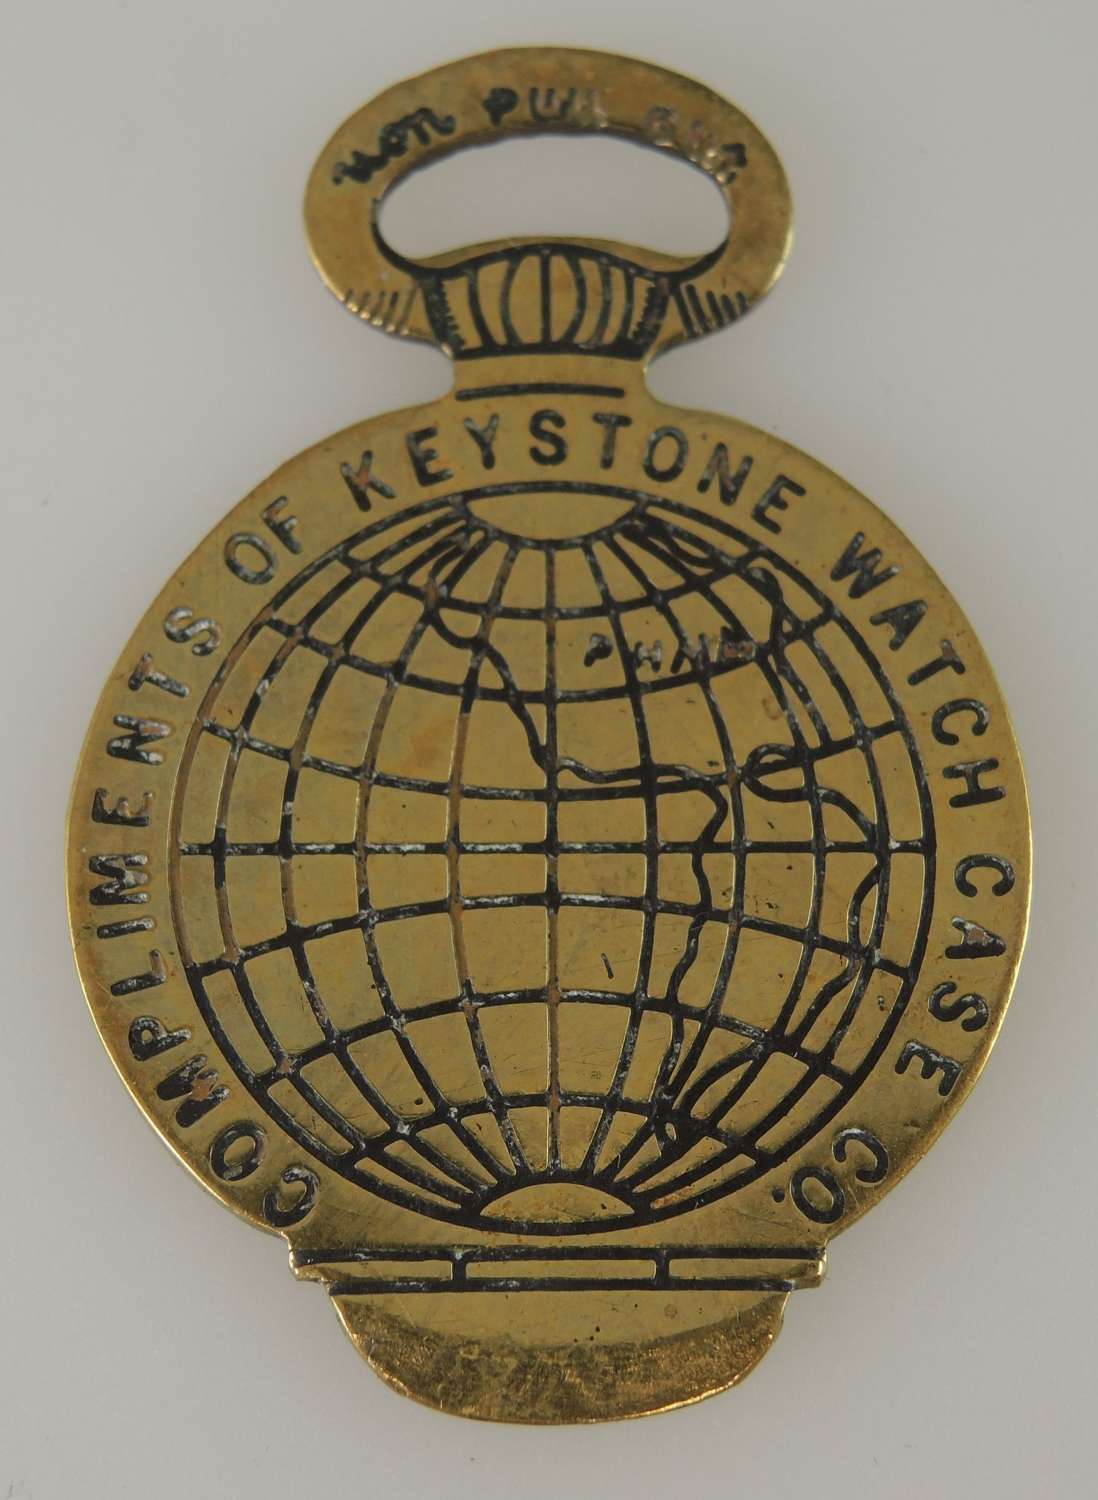 Rare promotional watch case opener by Keystone case co. C1893